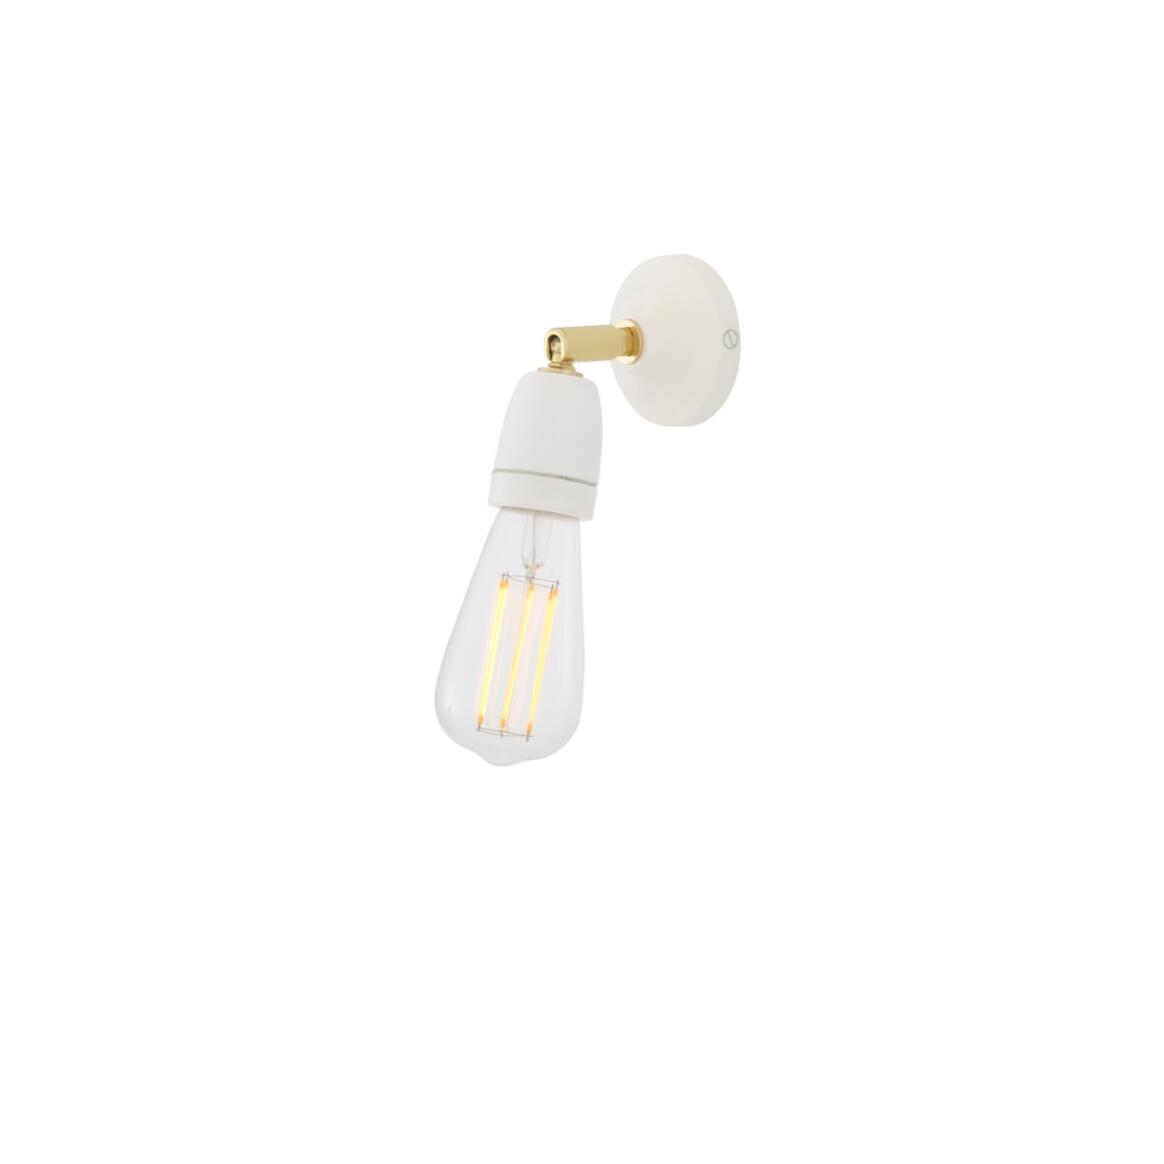 Caltra Small Swivel Wall Light with Ceramic Lamp Holder main product image